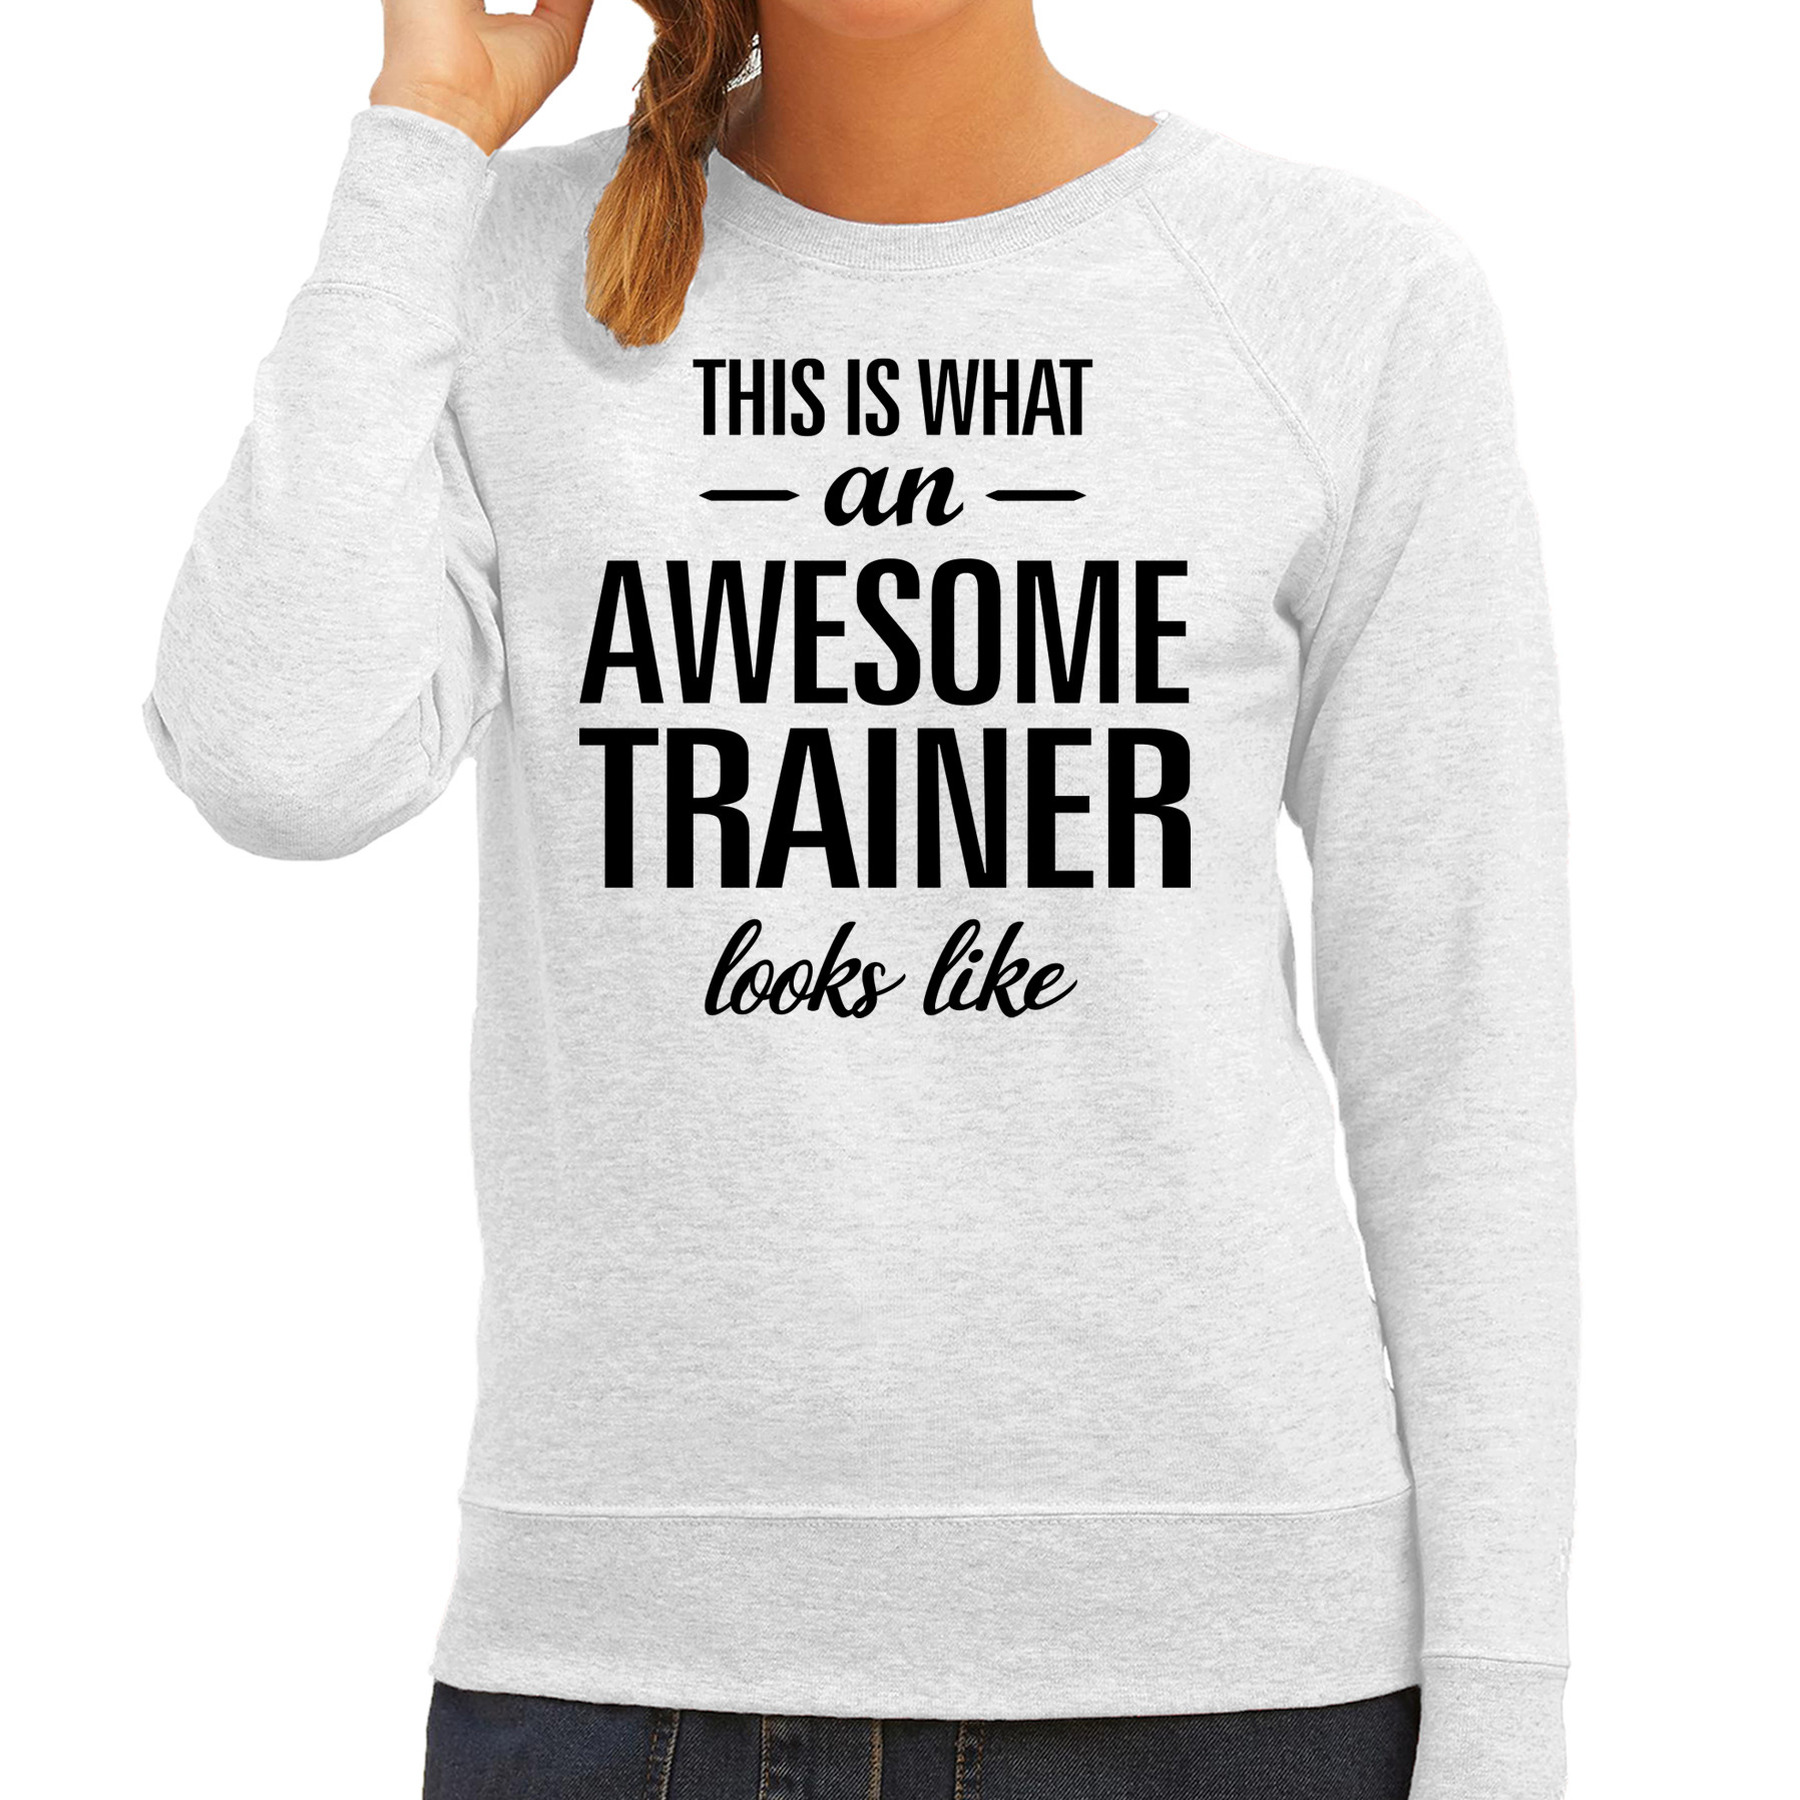 This is what an awesome trainer looks like cadeau sweater - trui grijs dames